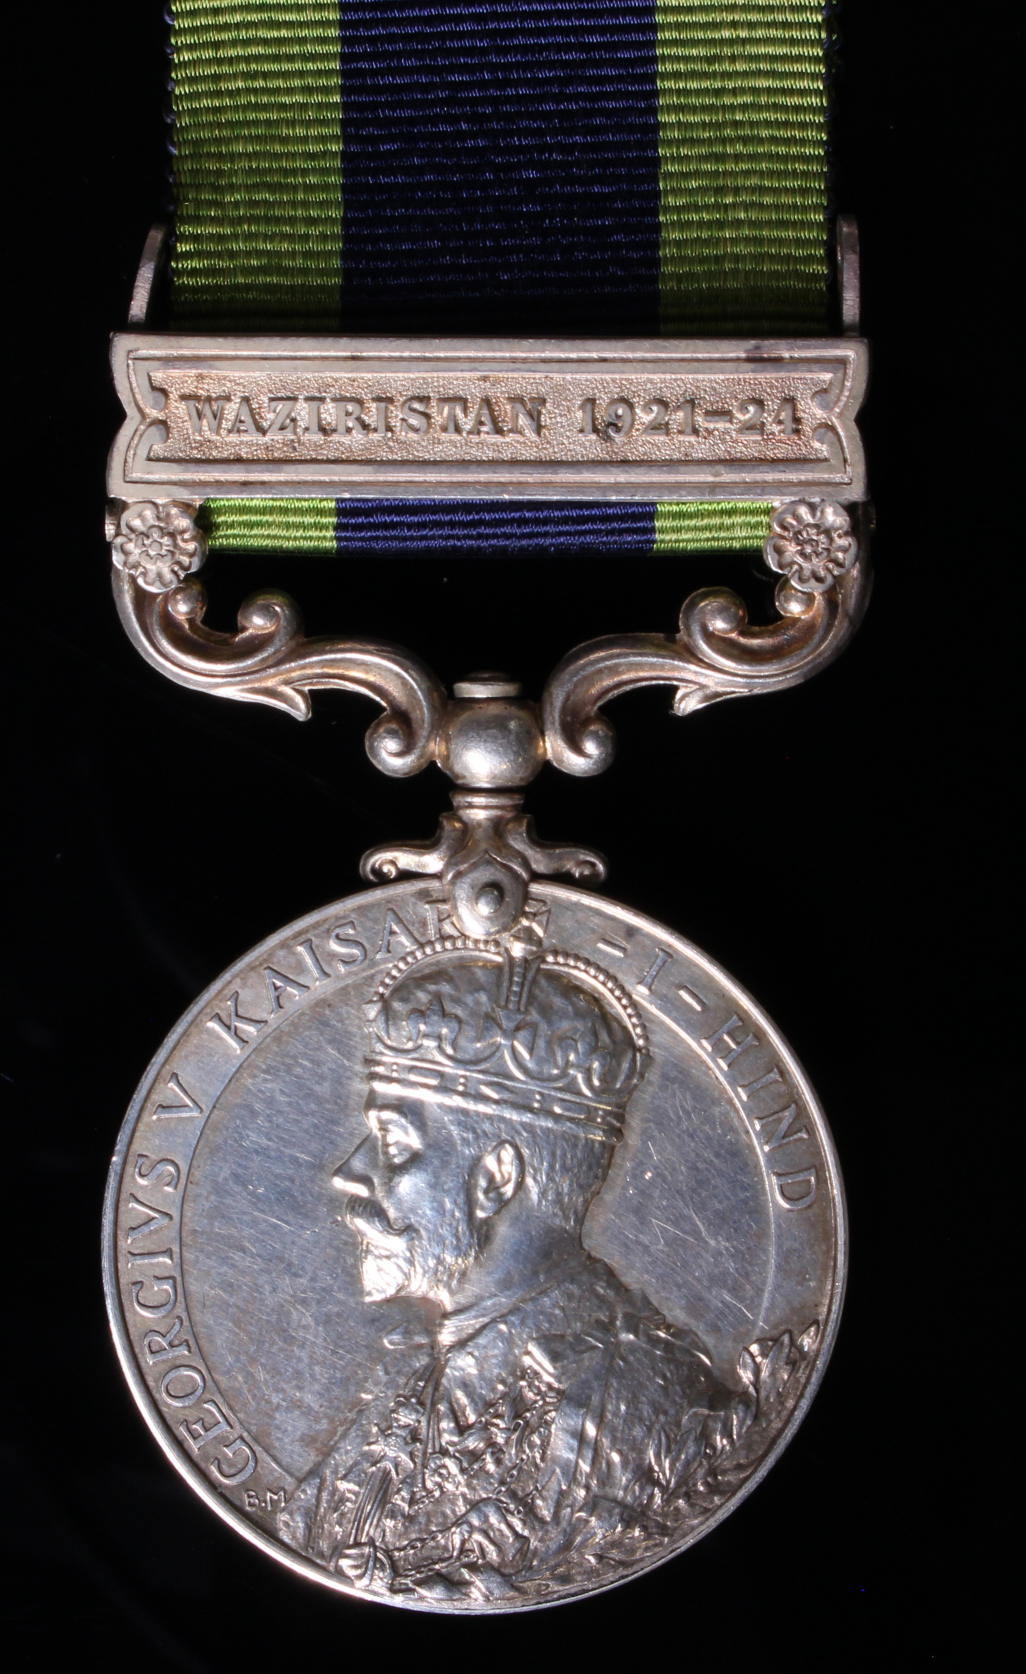 IGS GV with Waziristan 1921-24 clasp to (5877707 Dvr A Cartwright RA). Served with 47th Battery RFA.